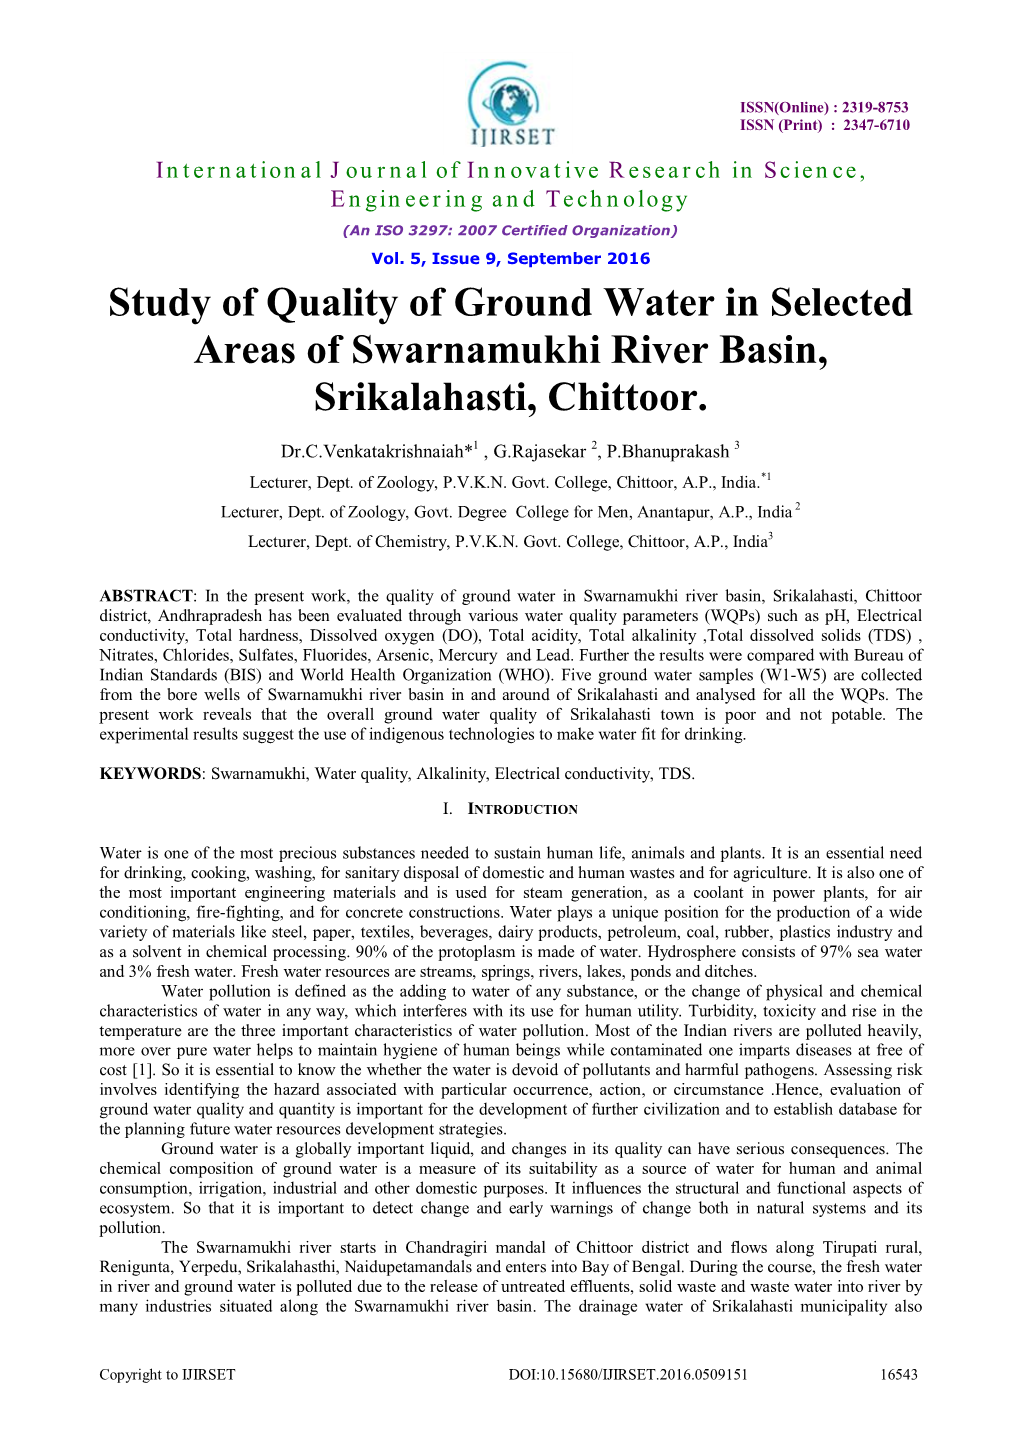 Study of Quality of Ground Water in Selected Areas of Swarnamukhi River Basin, Srikalahasti, Chittoor